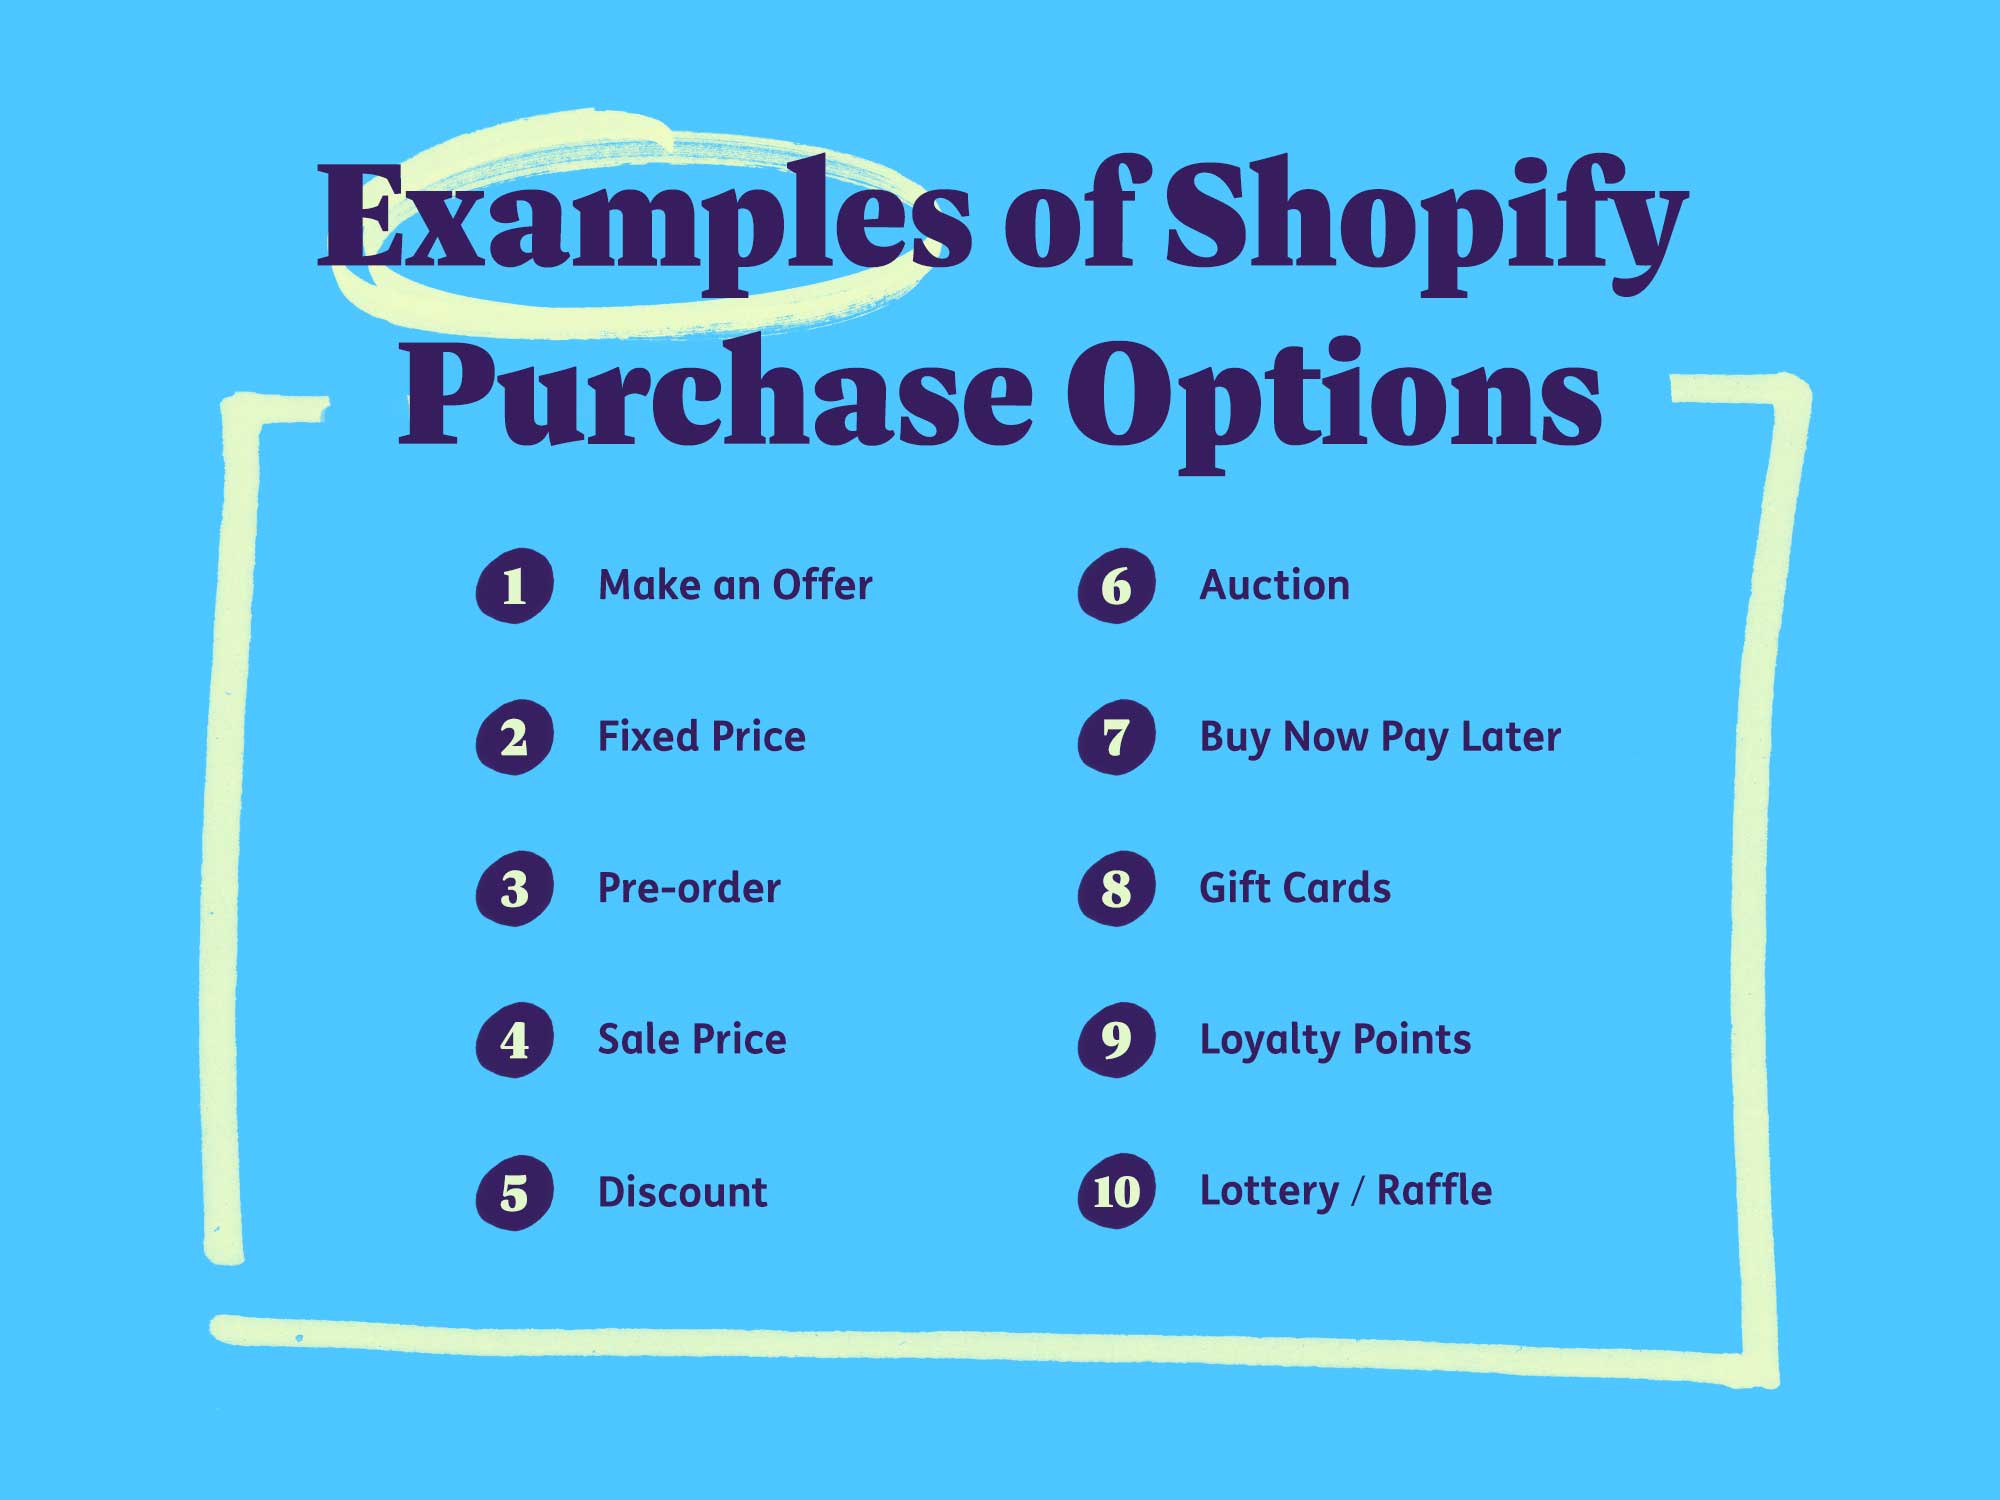 Examples of Shopify purchase options: Make an Offer, fixed price, pre-order, sale price, discount,  auction, buy now pay later, gift cards, loyalty points, lottery/raffle